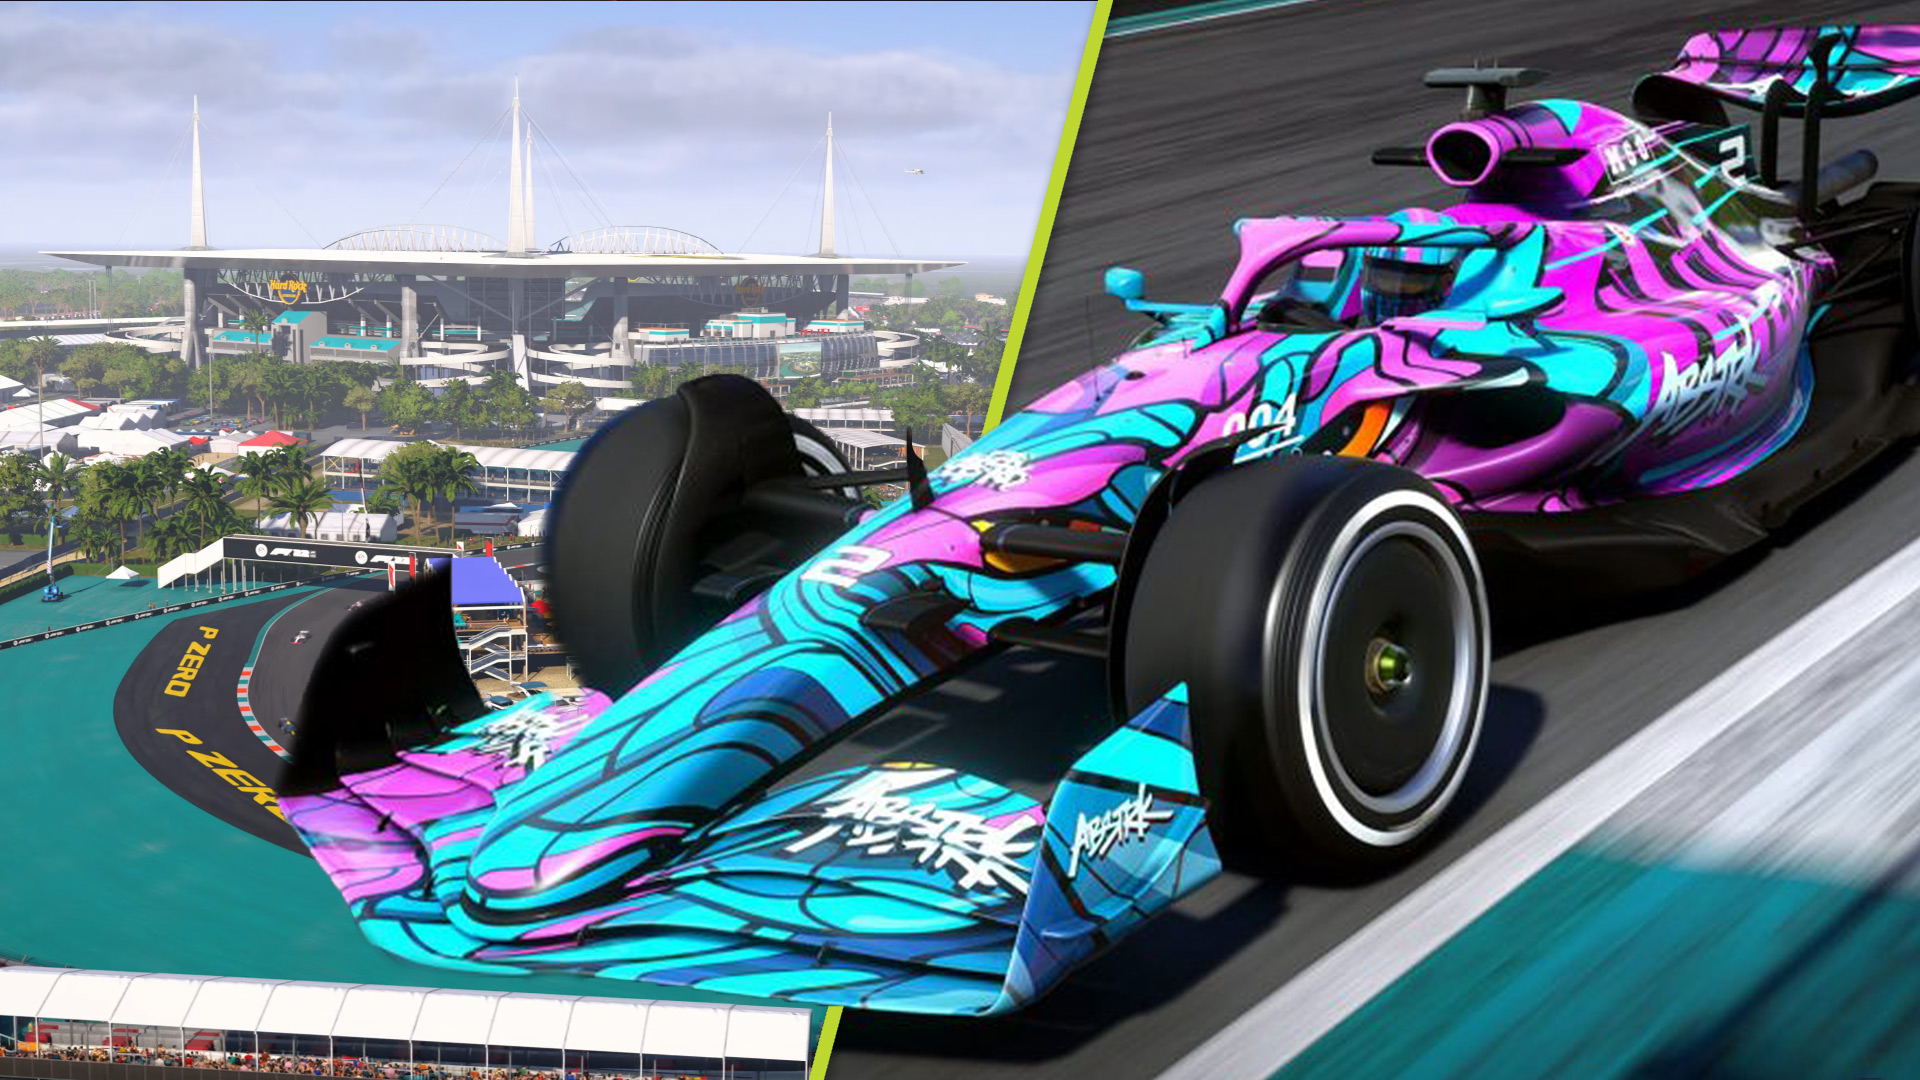 F1 22 game trailer shows off new Miami circuit